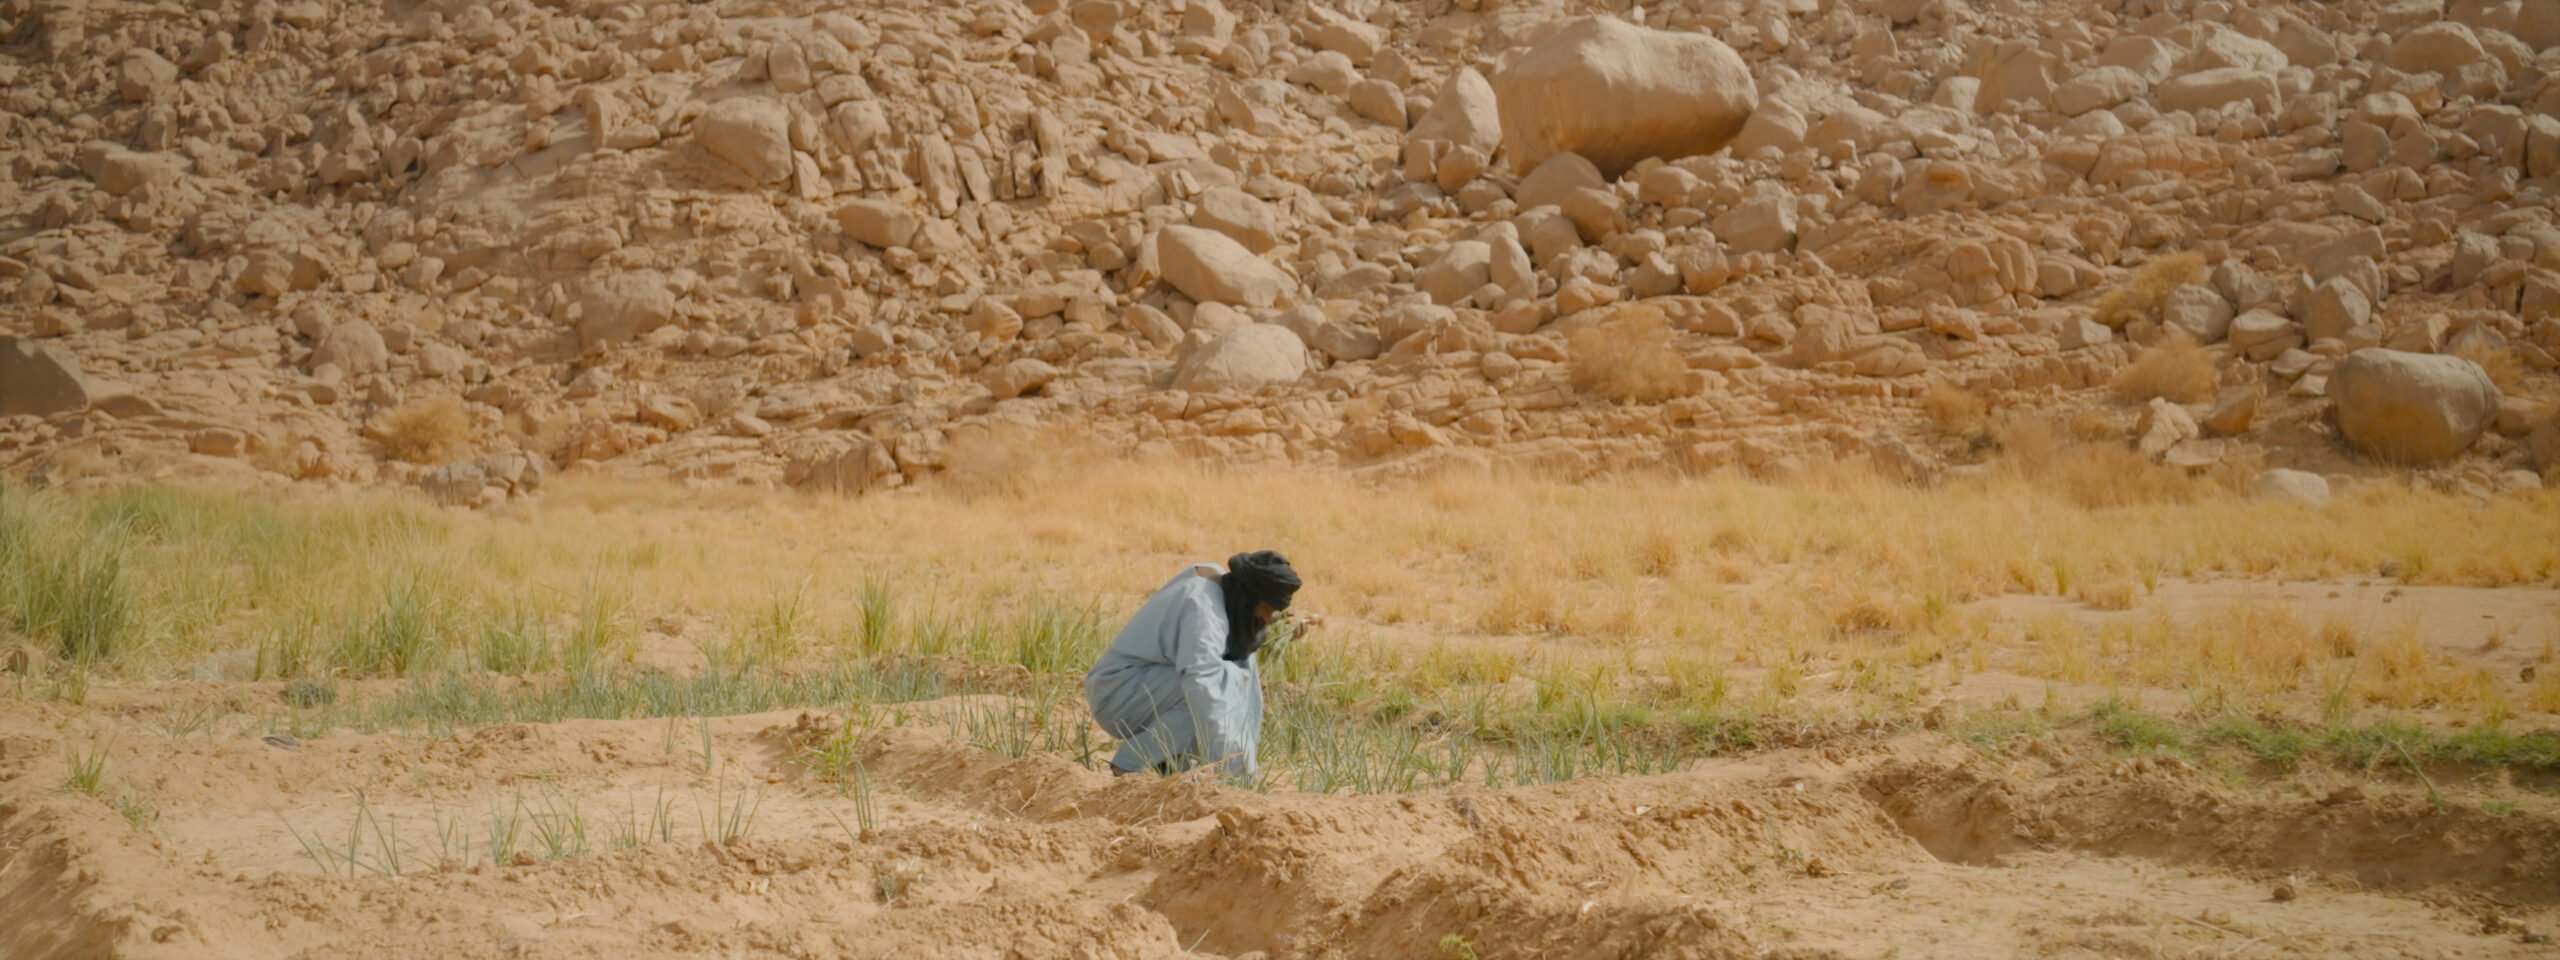 A person wearing a grey outfit and a black turban squats in the middle of a sandy ground with patches of green and yellow grass. The background is a steep, rugged rocky slope